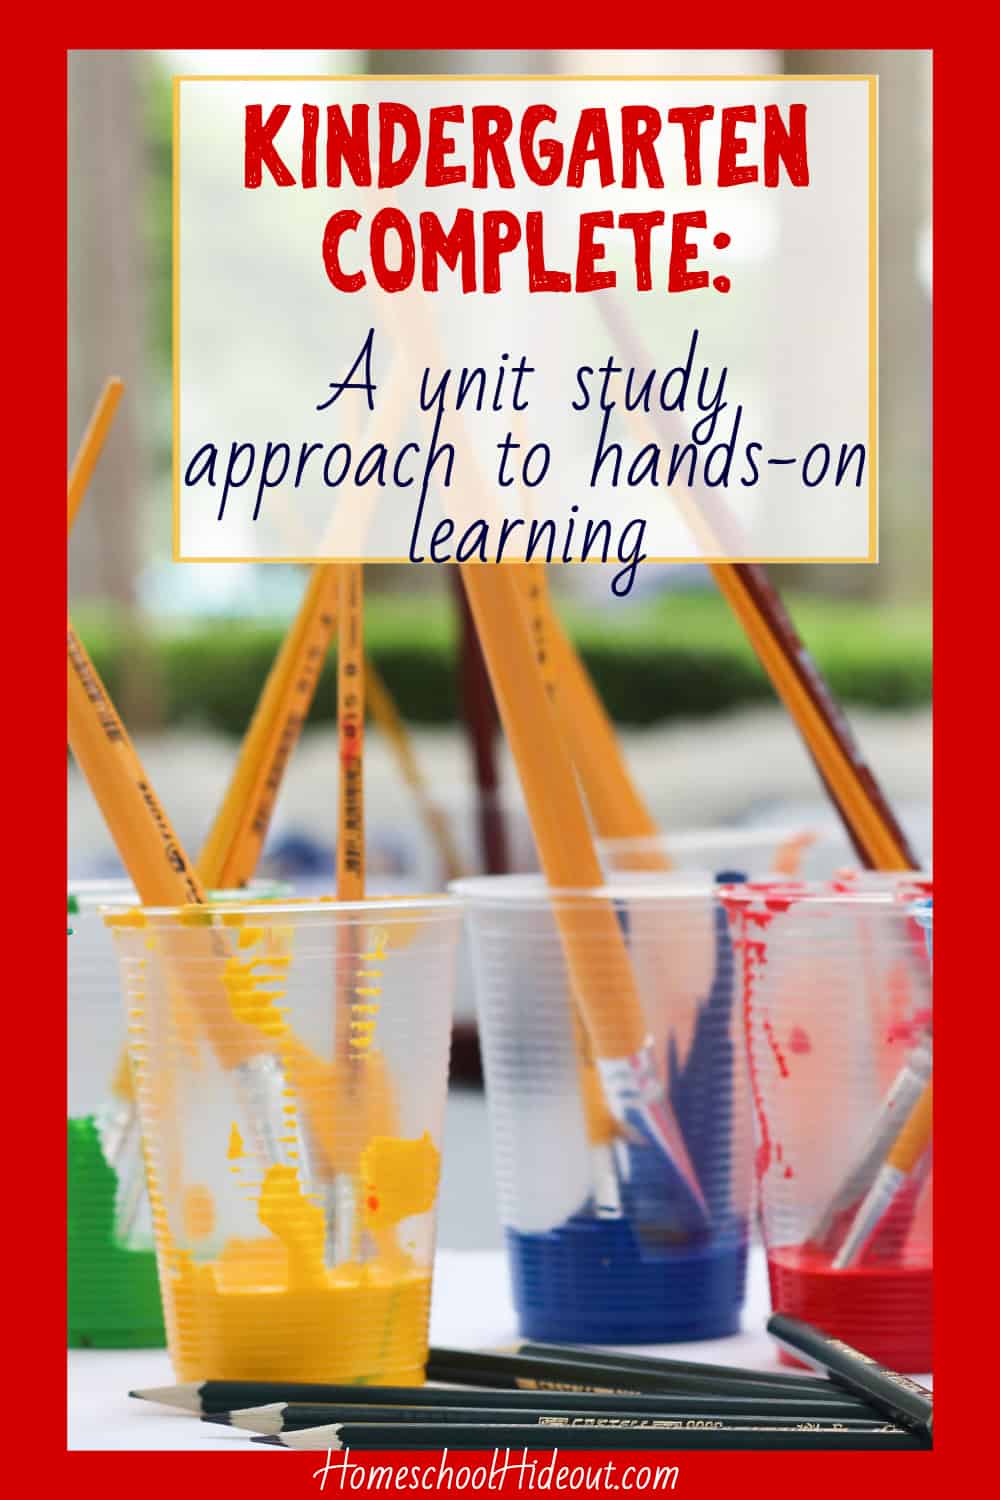 The Kindergarten Complete curriculum is a dream for moms who want a little bit of structure but understand that play is the most important thing their young child can do!